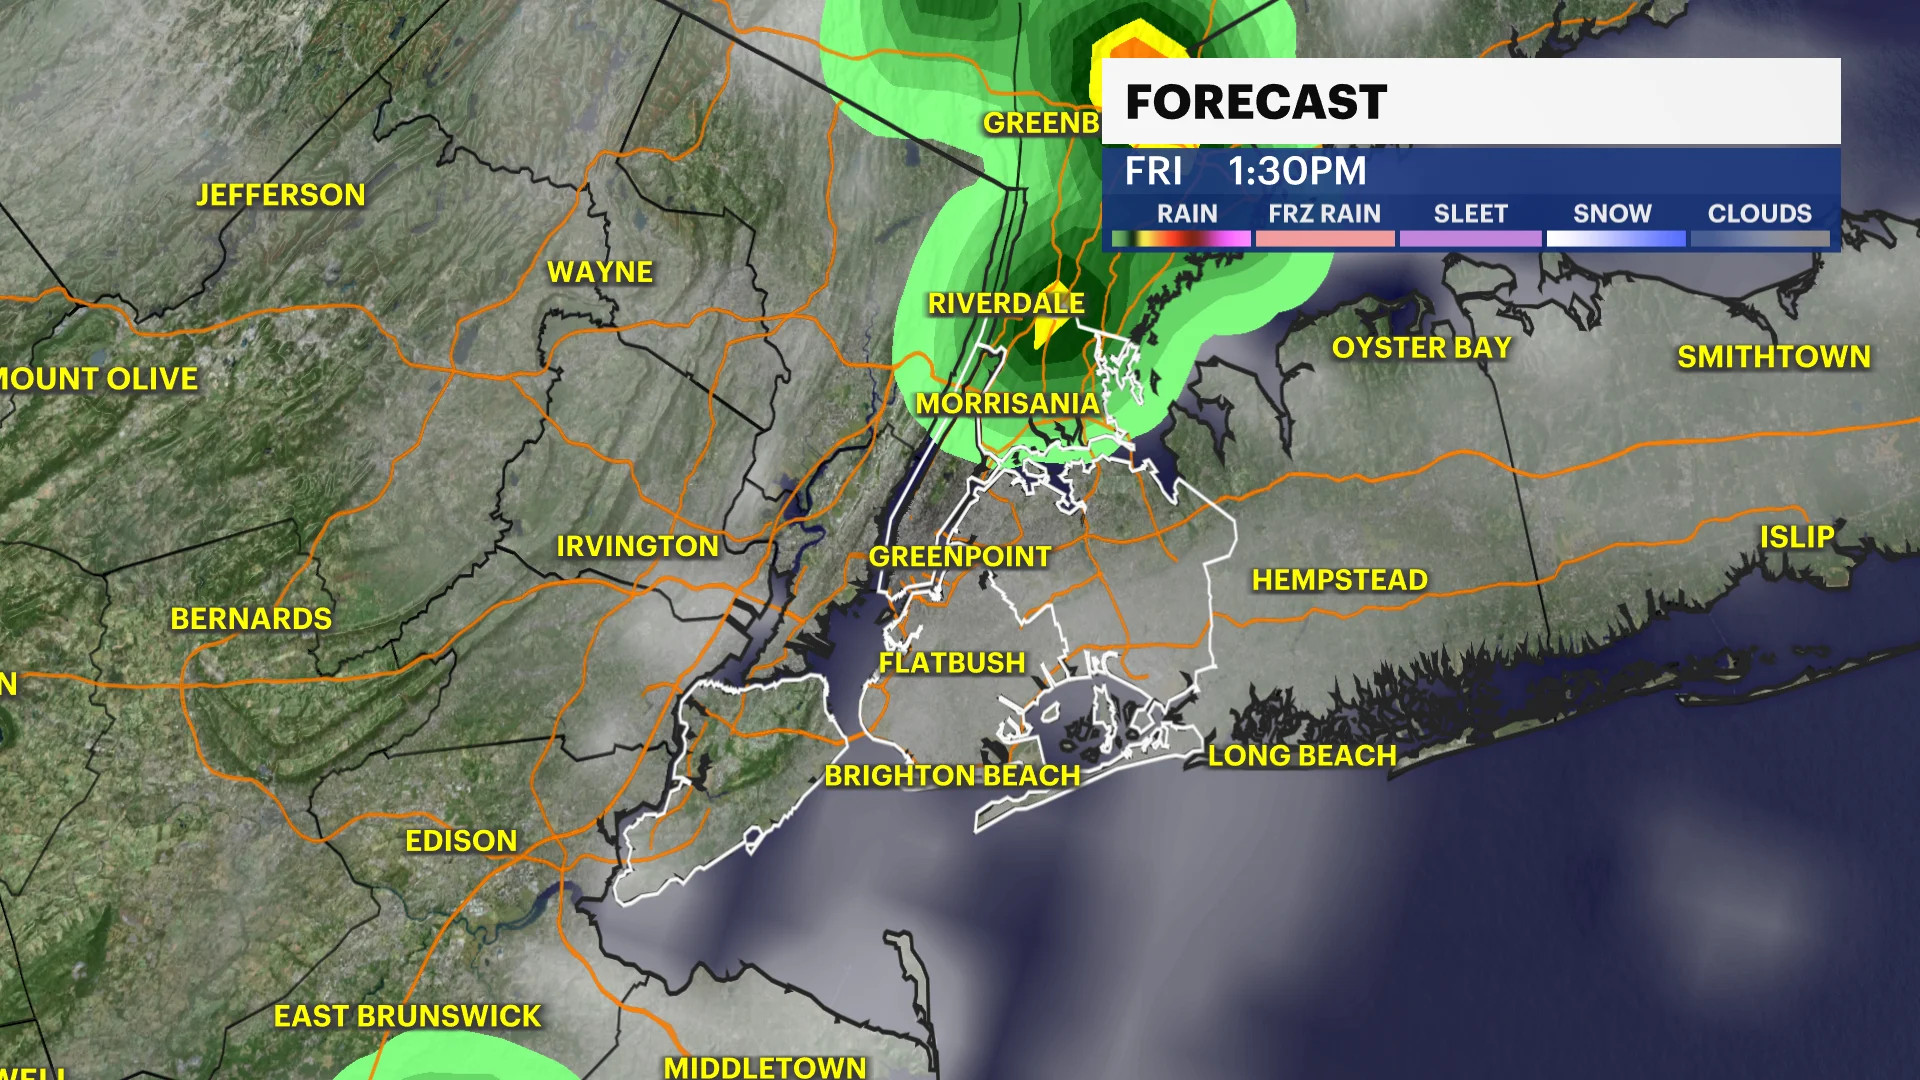 Cloudy and humid today for the Bronx; tracking pop-up storms this weekend